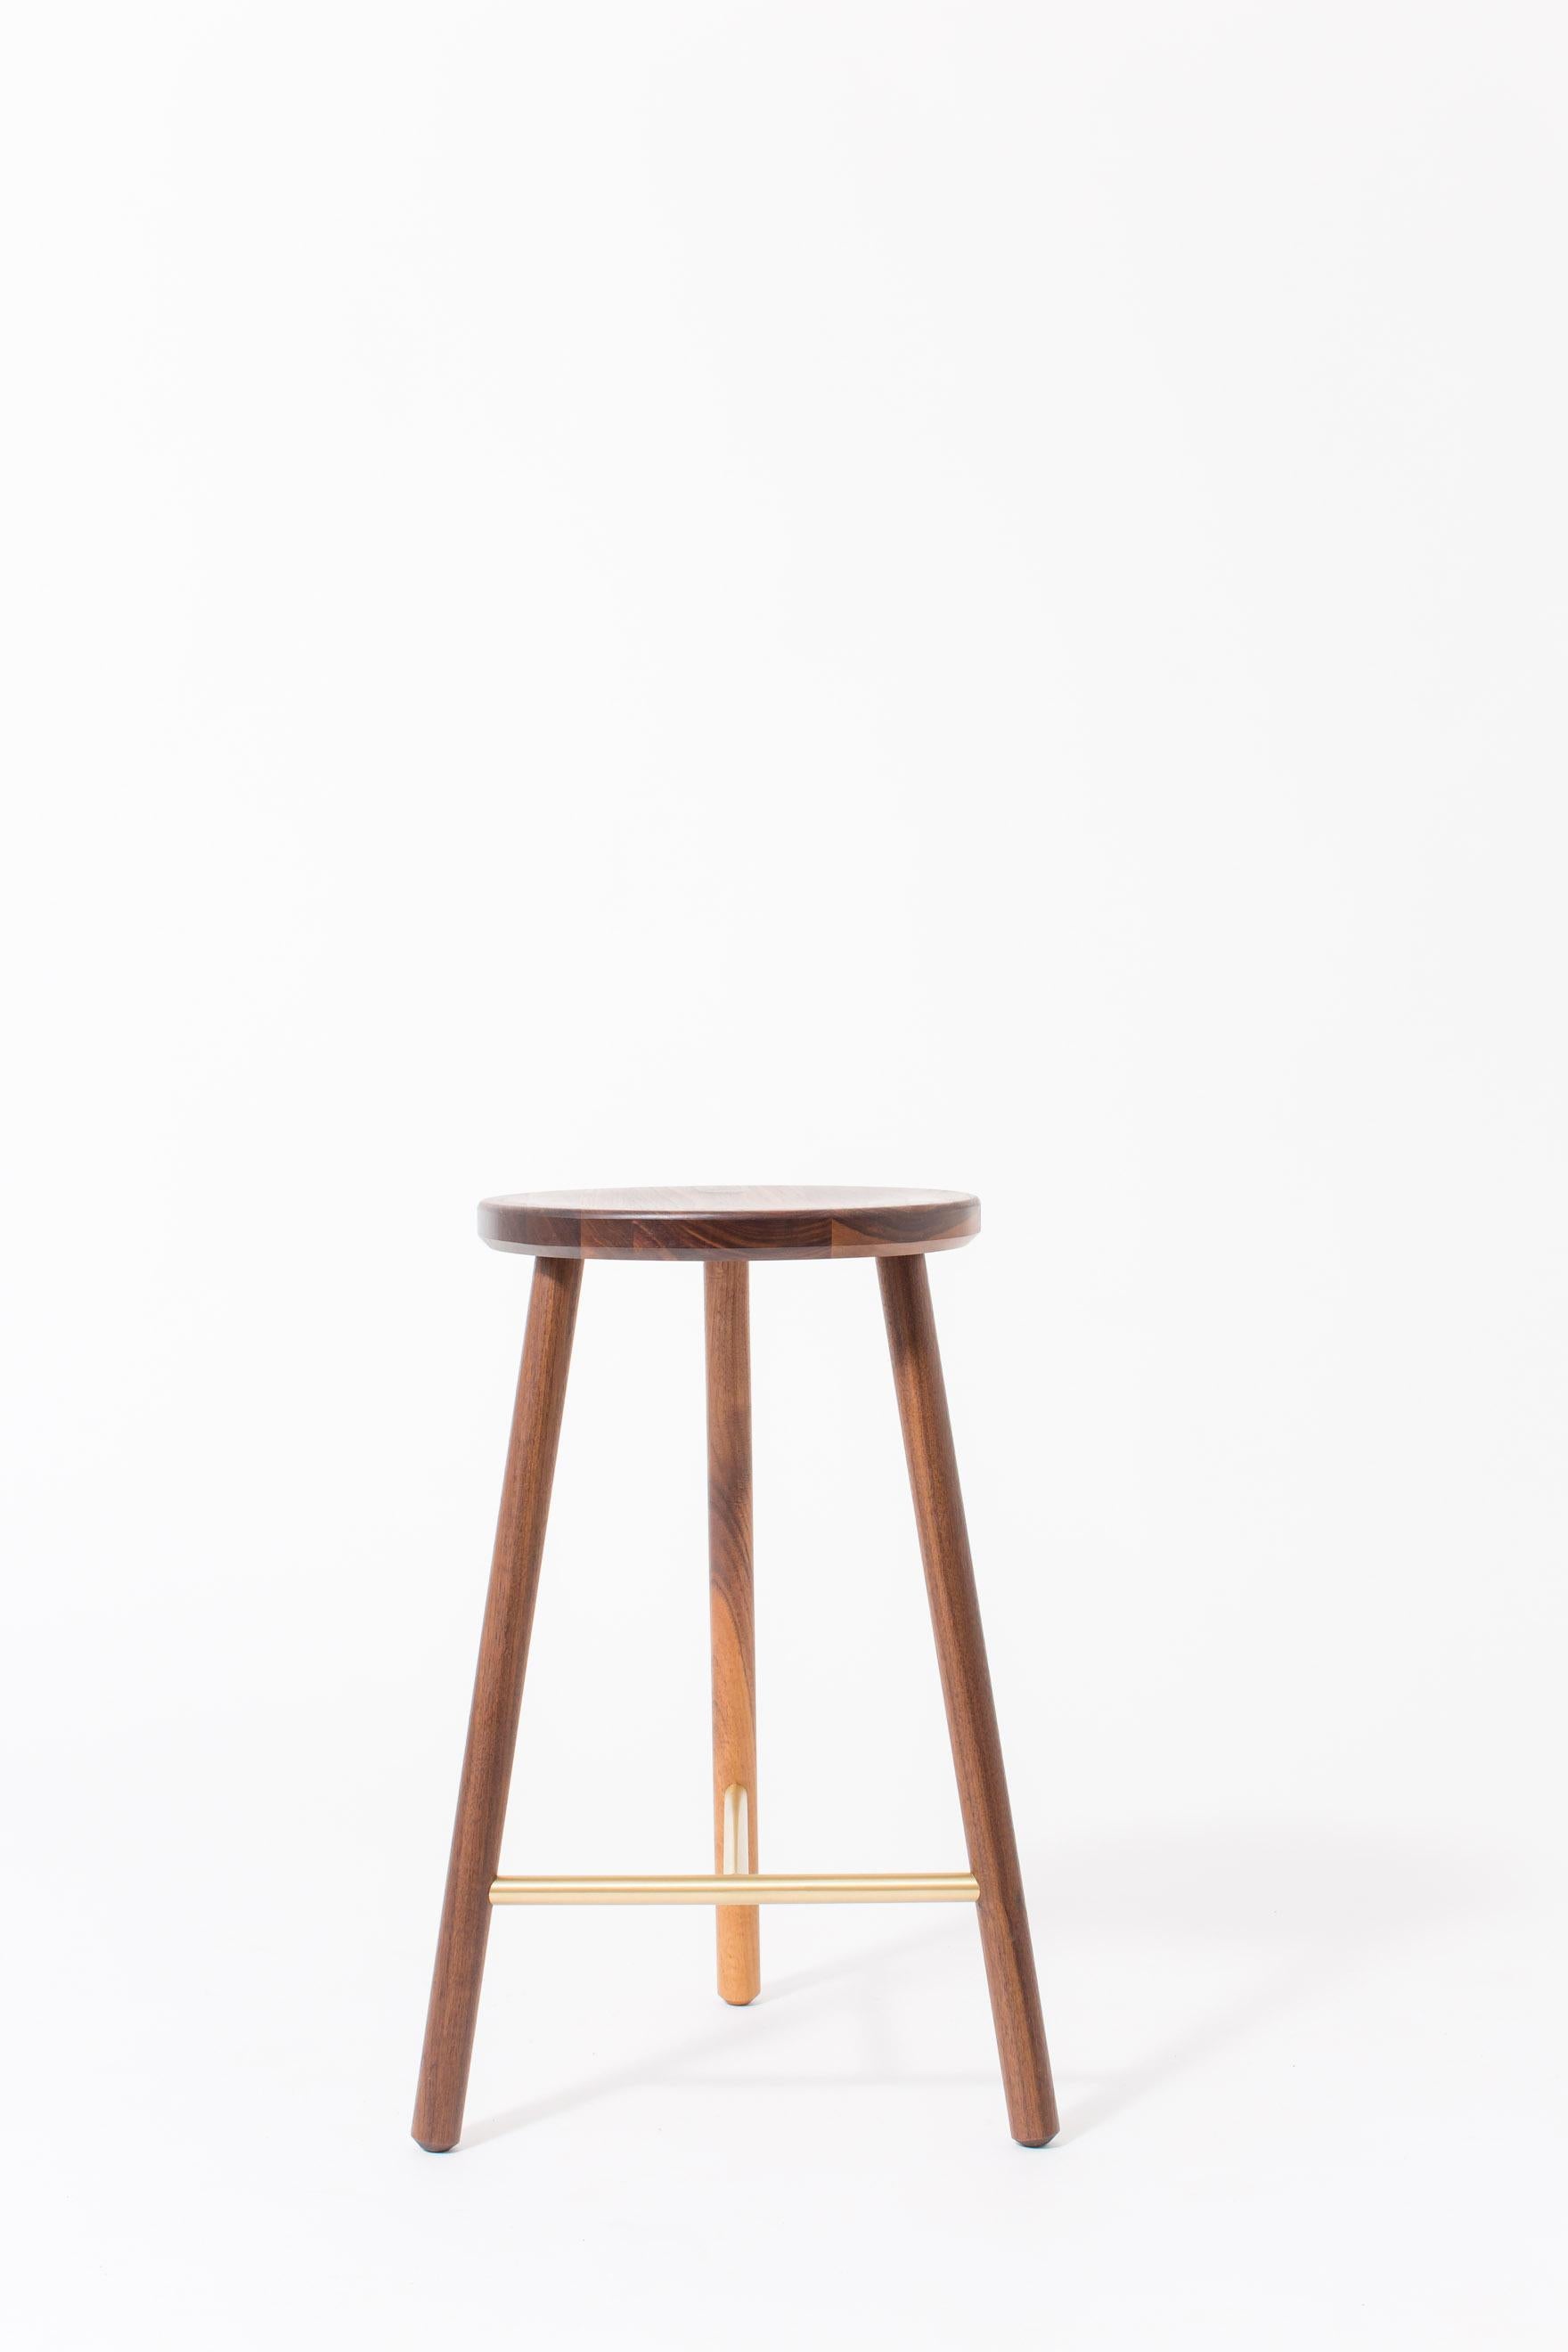 The scout stool has a slim design, allowing it to be tucked into small spaces with a minimal footprint.

Shown in natural walnut and brass. Domestic hardwood species available include white oak, walnut, maple or ash. Hand rubbed oil finish, 0% VOC.